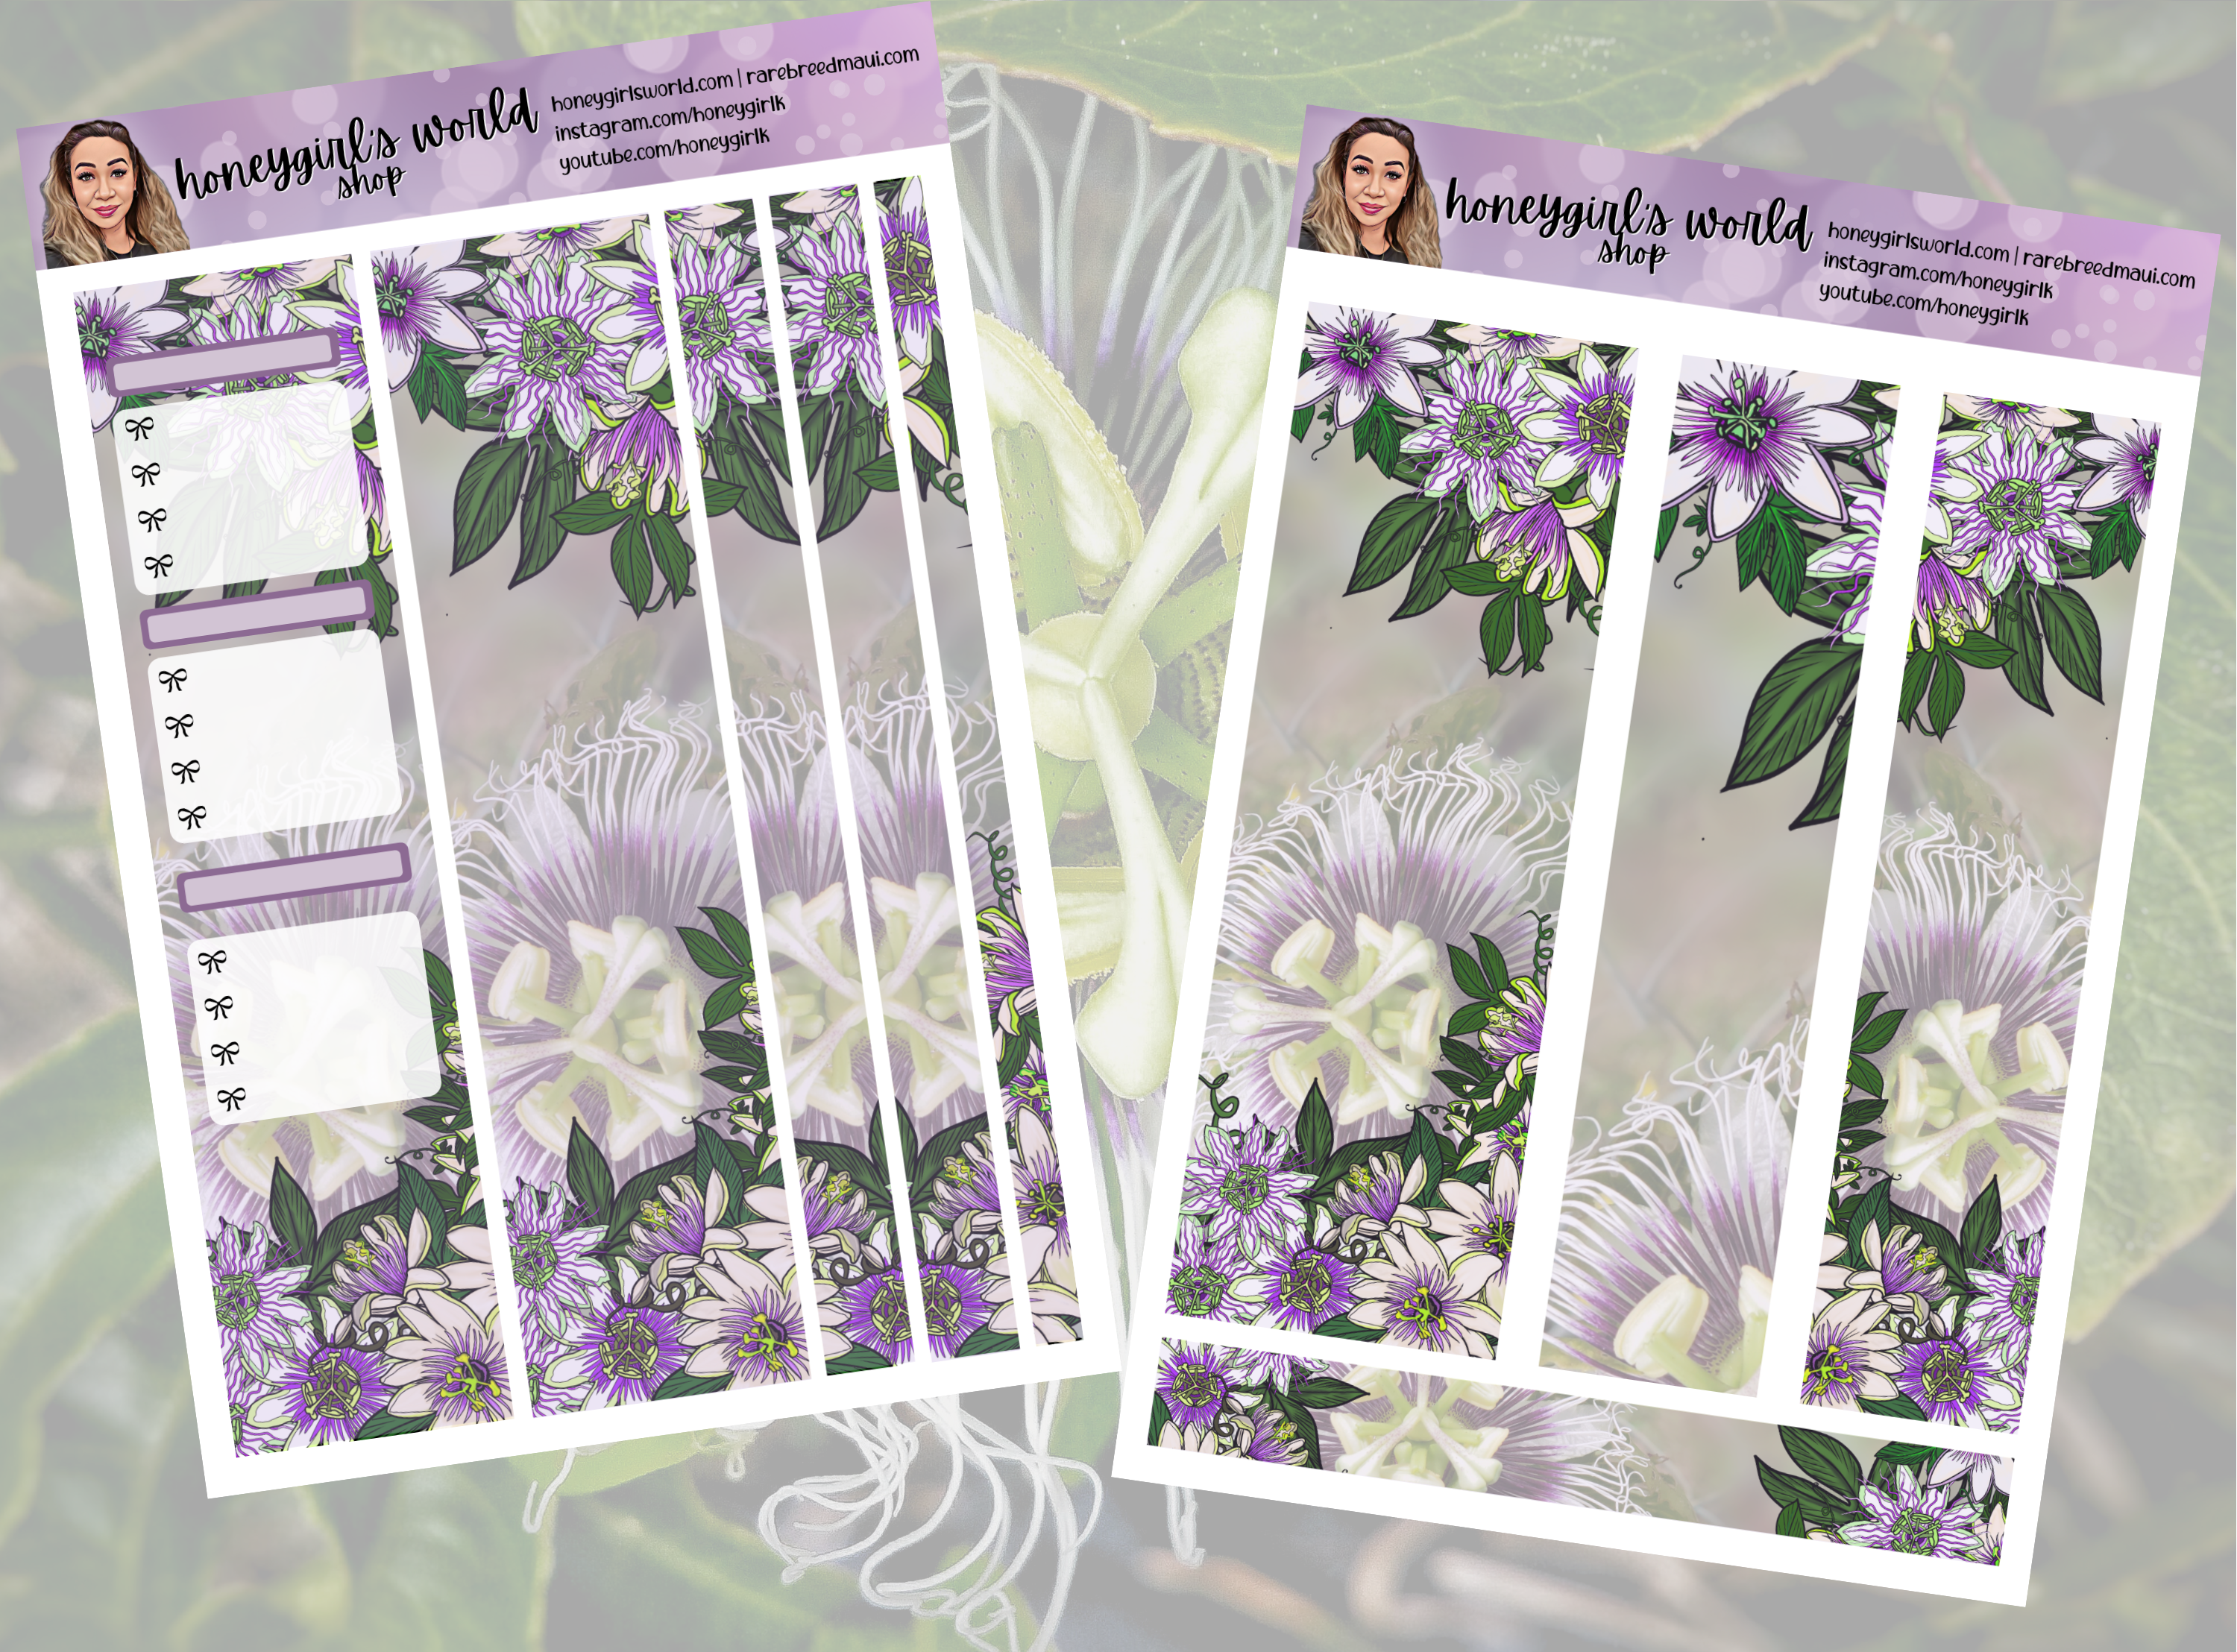 April Monthly Planner Sticker Kit - Spring Passion Fruit Liliko'i Blossom Design - 8 Pages Total, for use with Planners & Bullet Journals